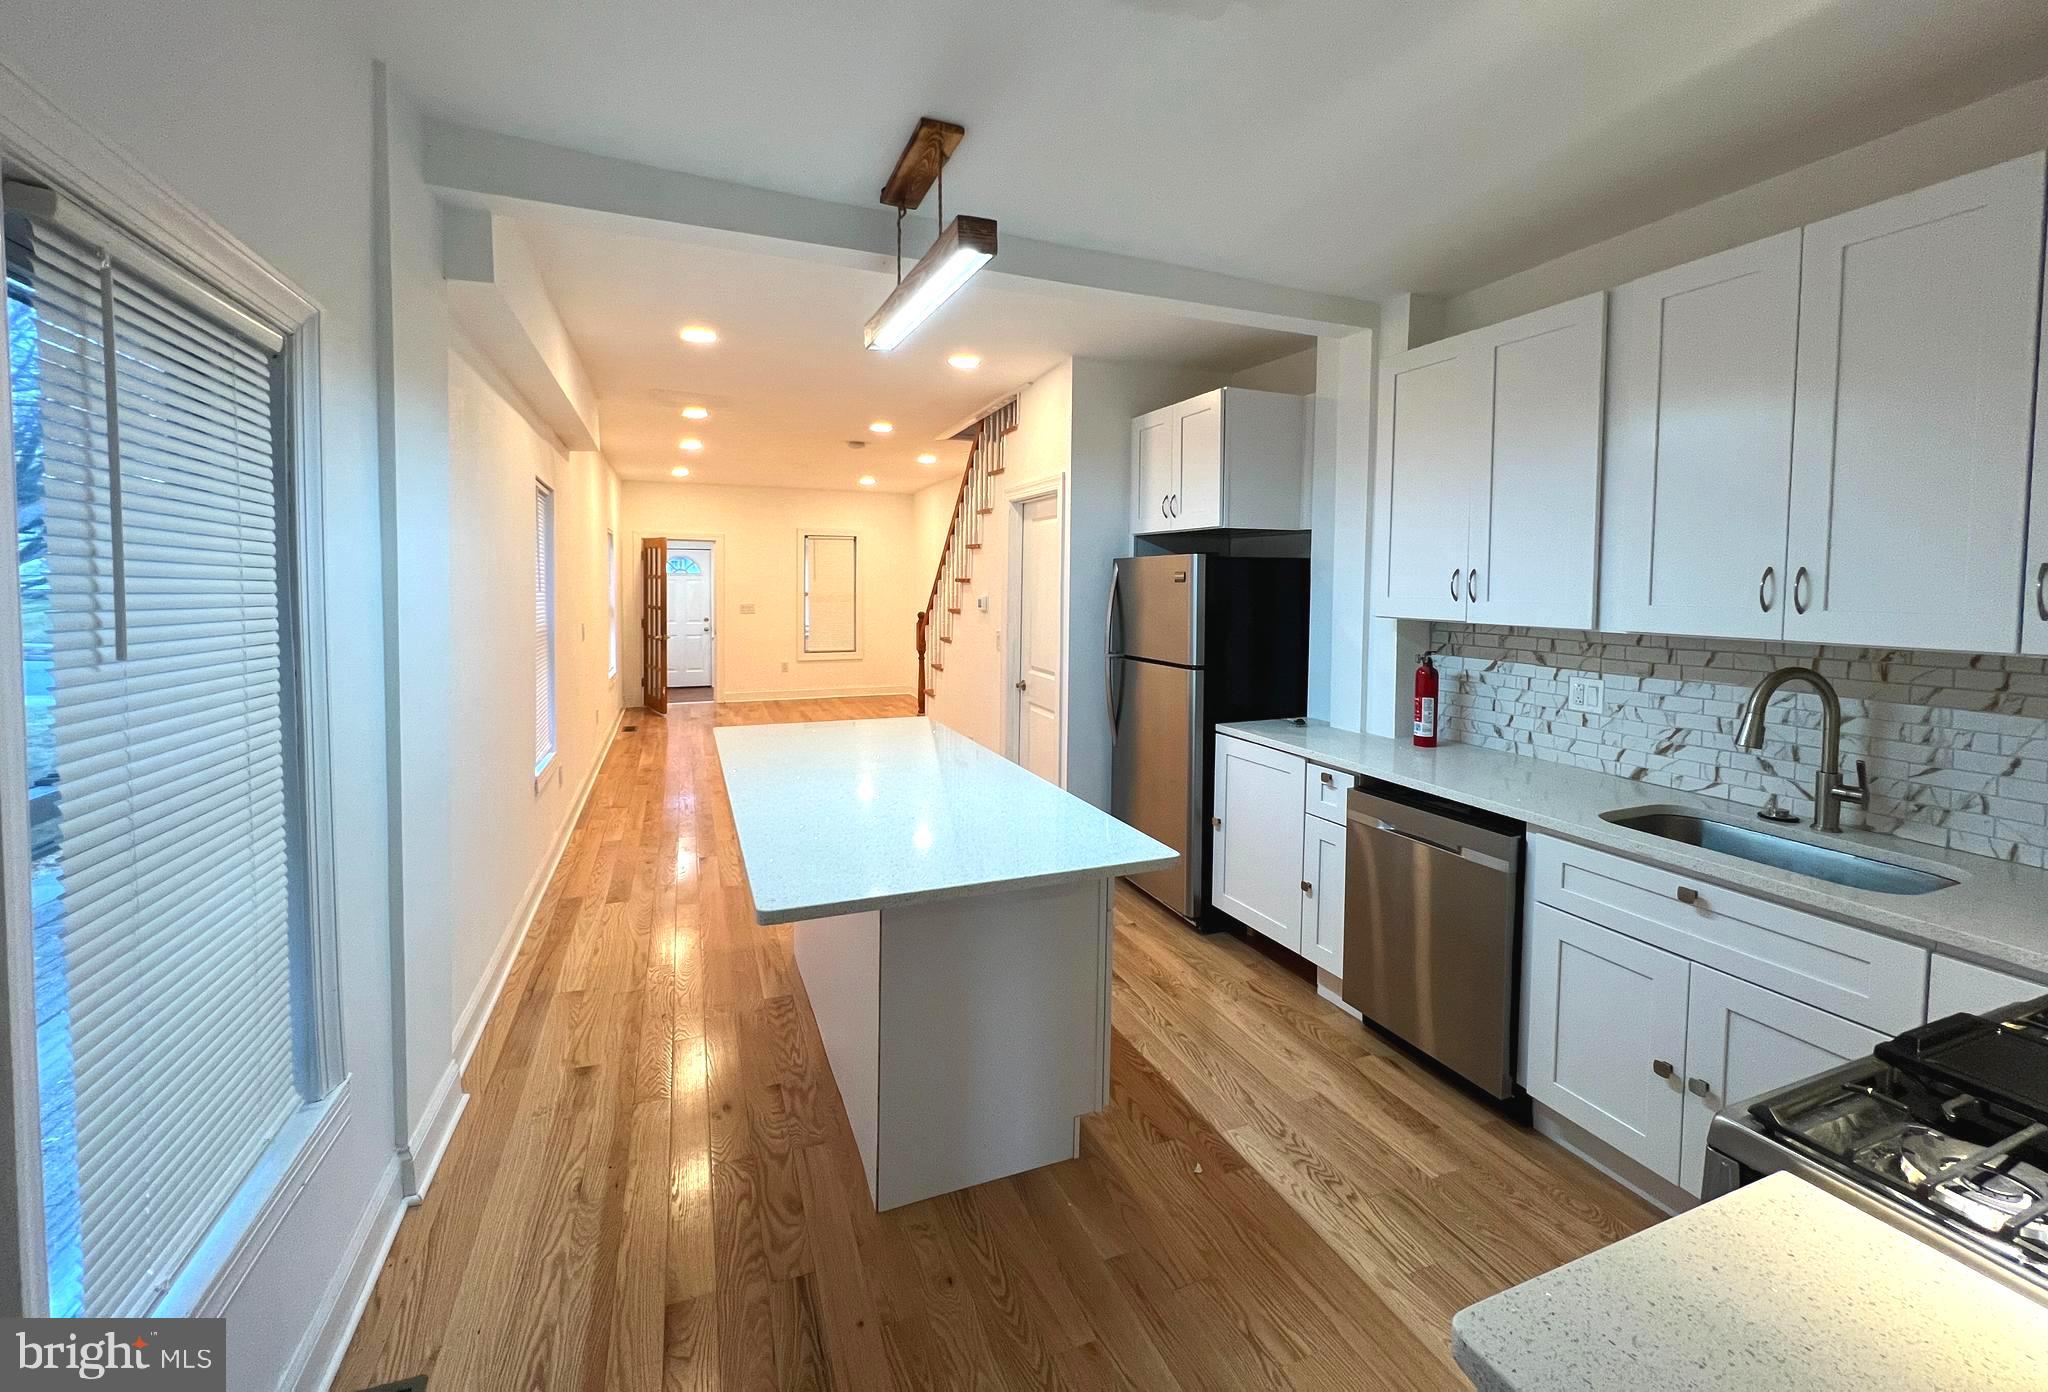 a large kitchen with stainless steel appliances kitchen island granite countertop a stove and a sink